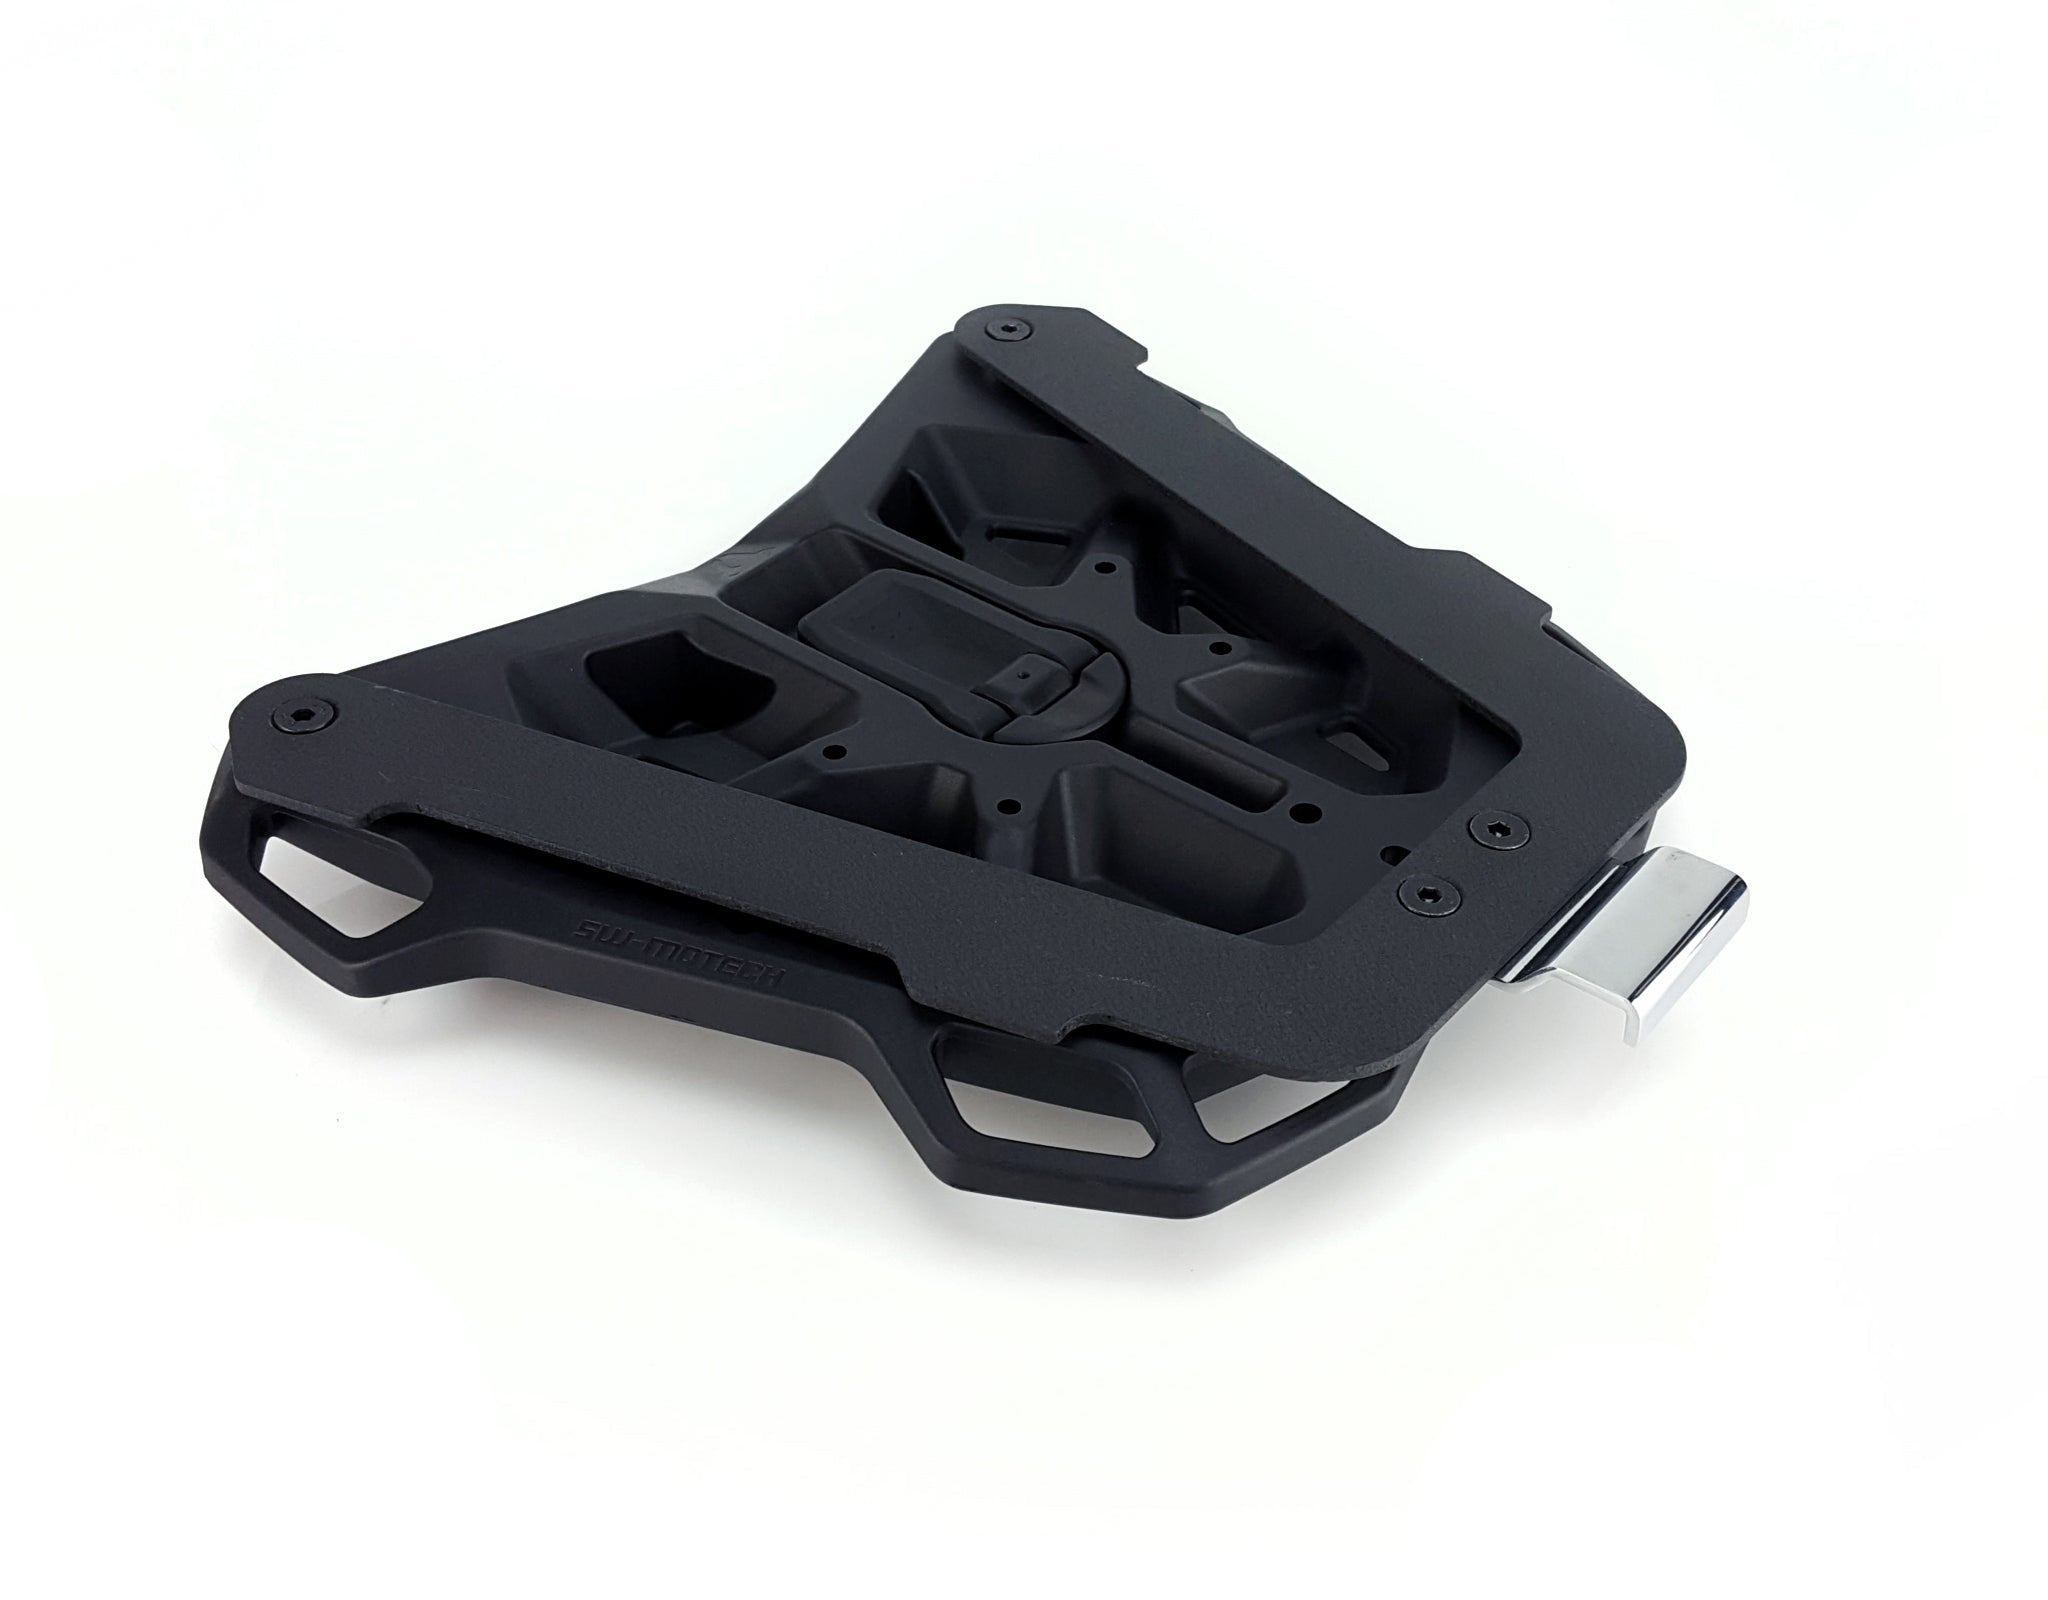 Dryspec H35 A-Frame Rack Adapter and Adapter Plate for SW-MOTECH STREET-RACK